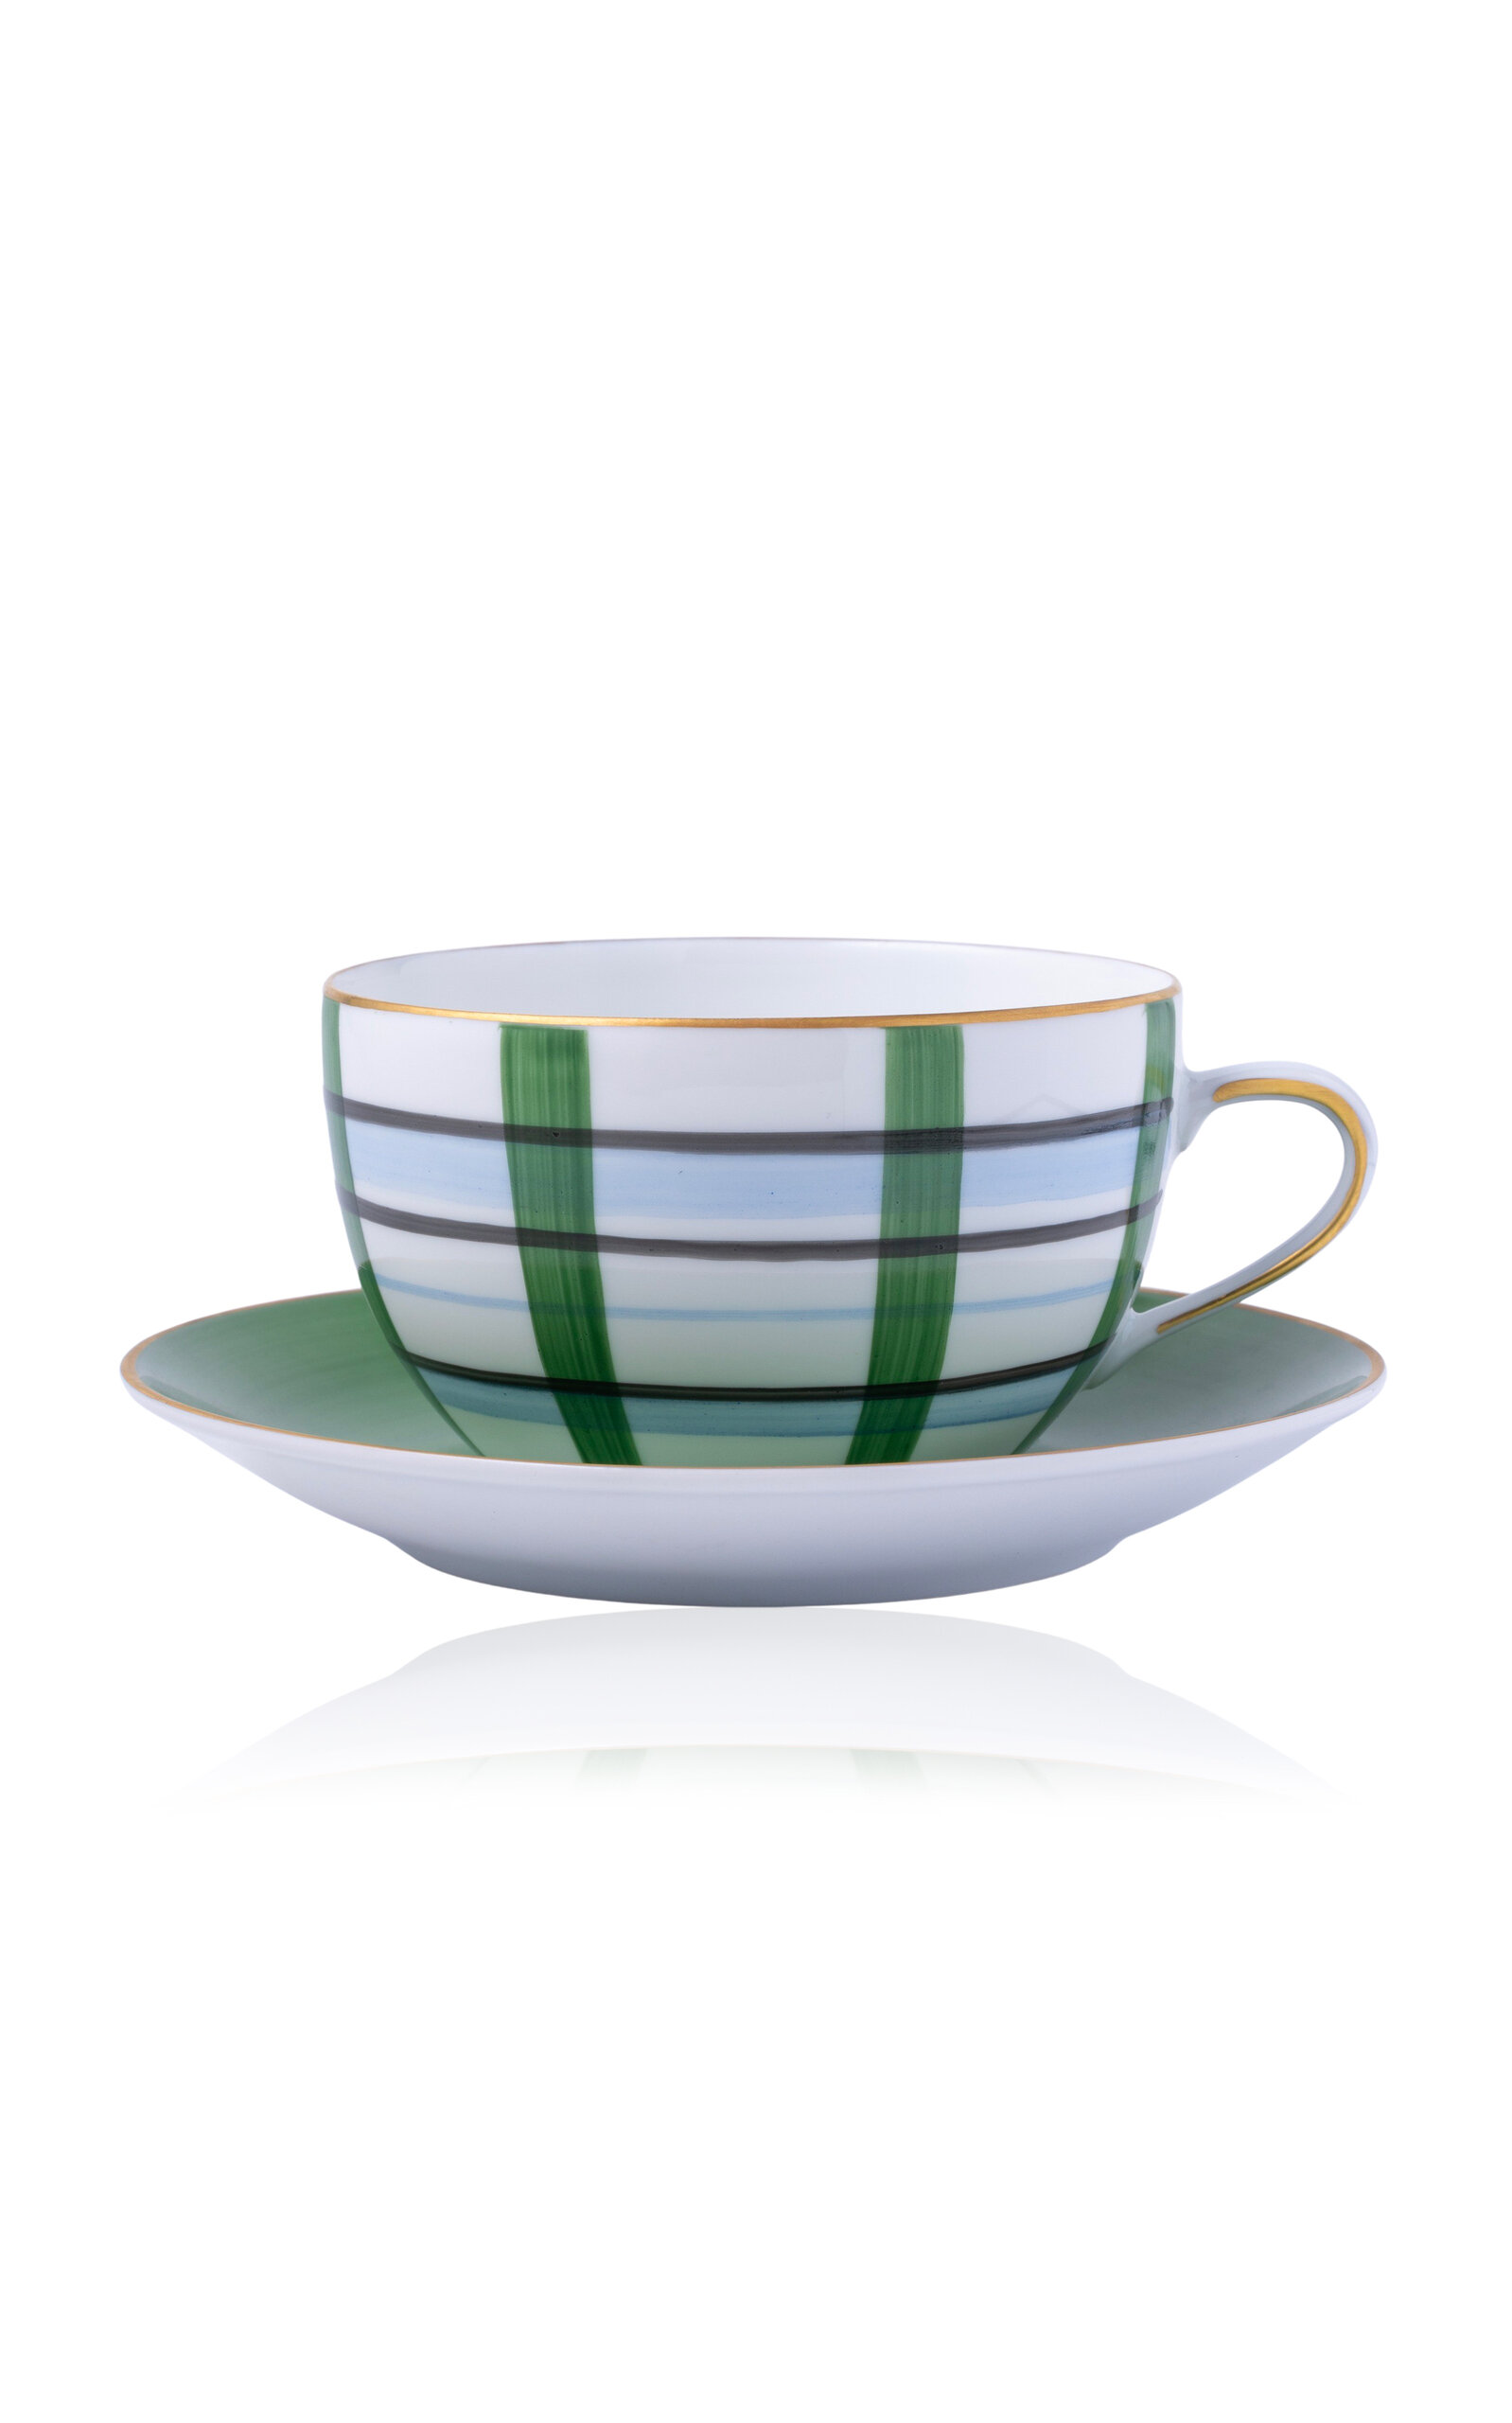 Marie Daage Madras Porcelain Breakfast Cup And Saucer Set In Multi